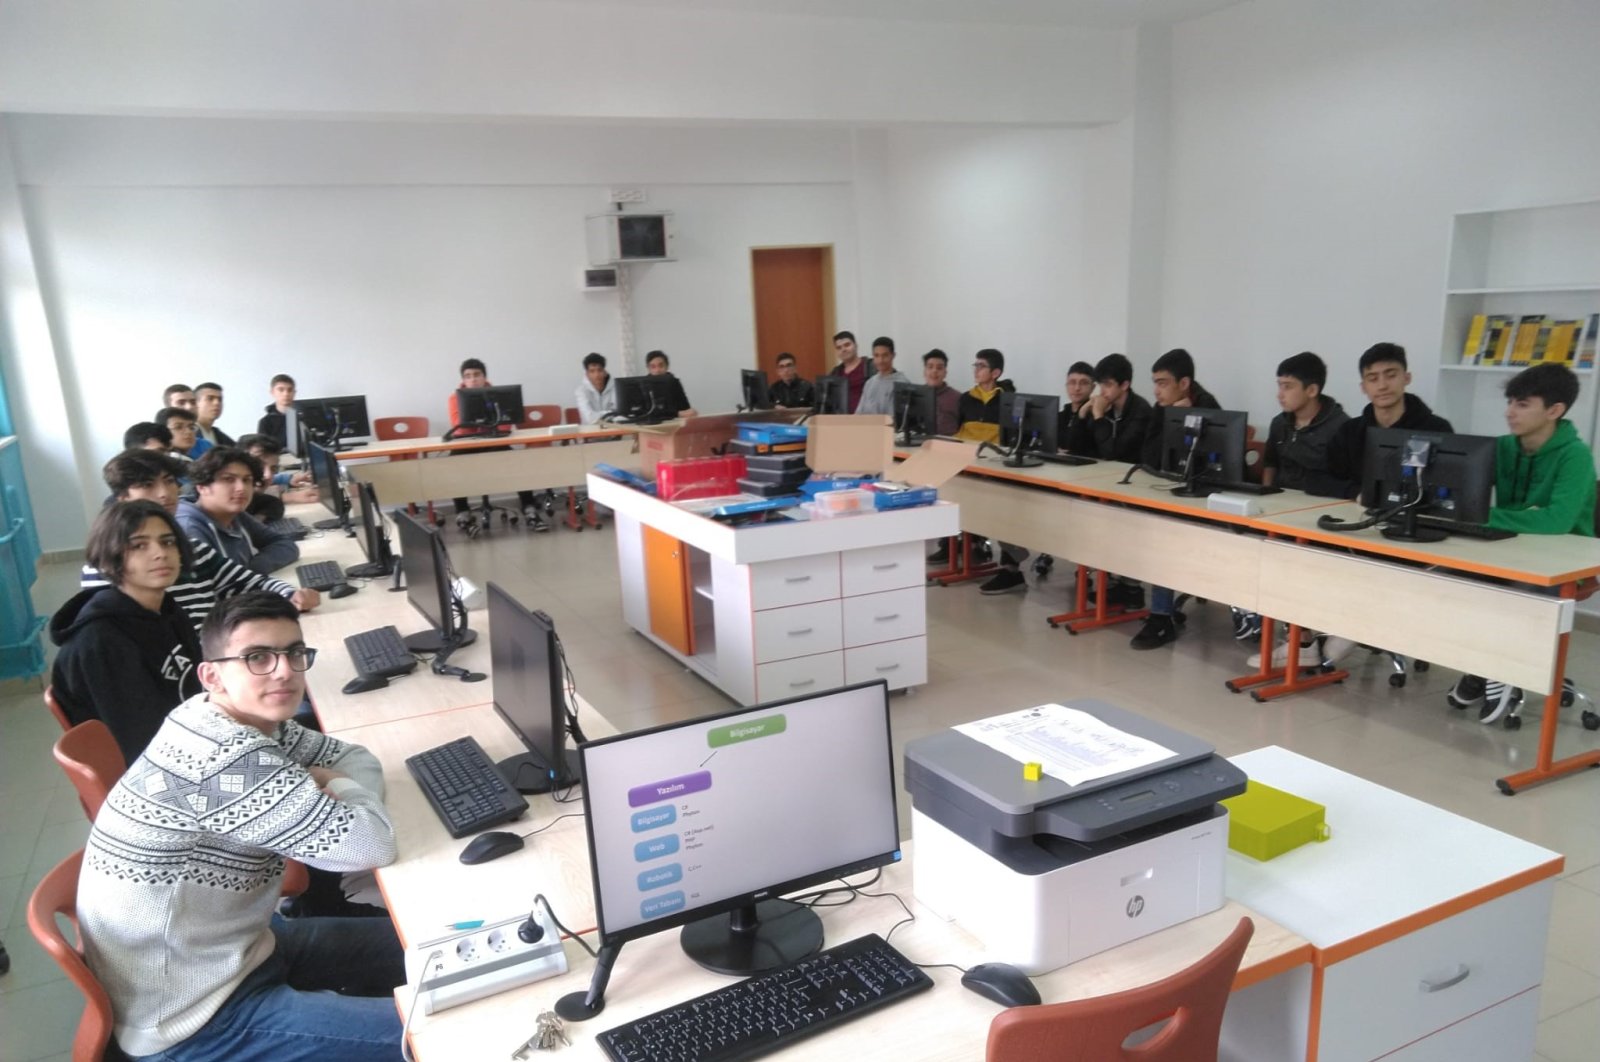 Students participate in the "Technology and Entrepreneurship Workshop" in Bahçelievler, Istanbul, Dec. 20, 2022. (Courtesy of the Directorate of Education)